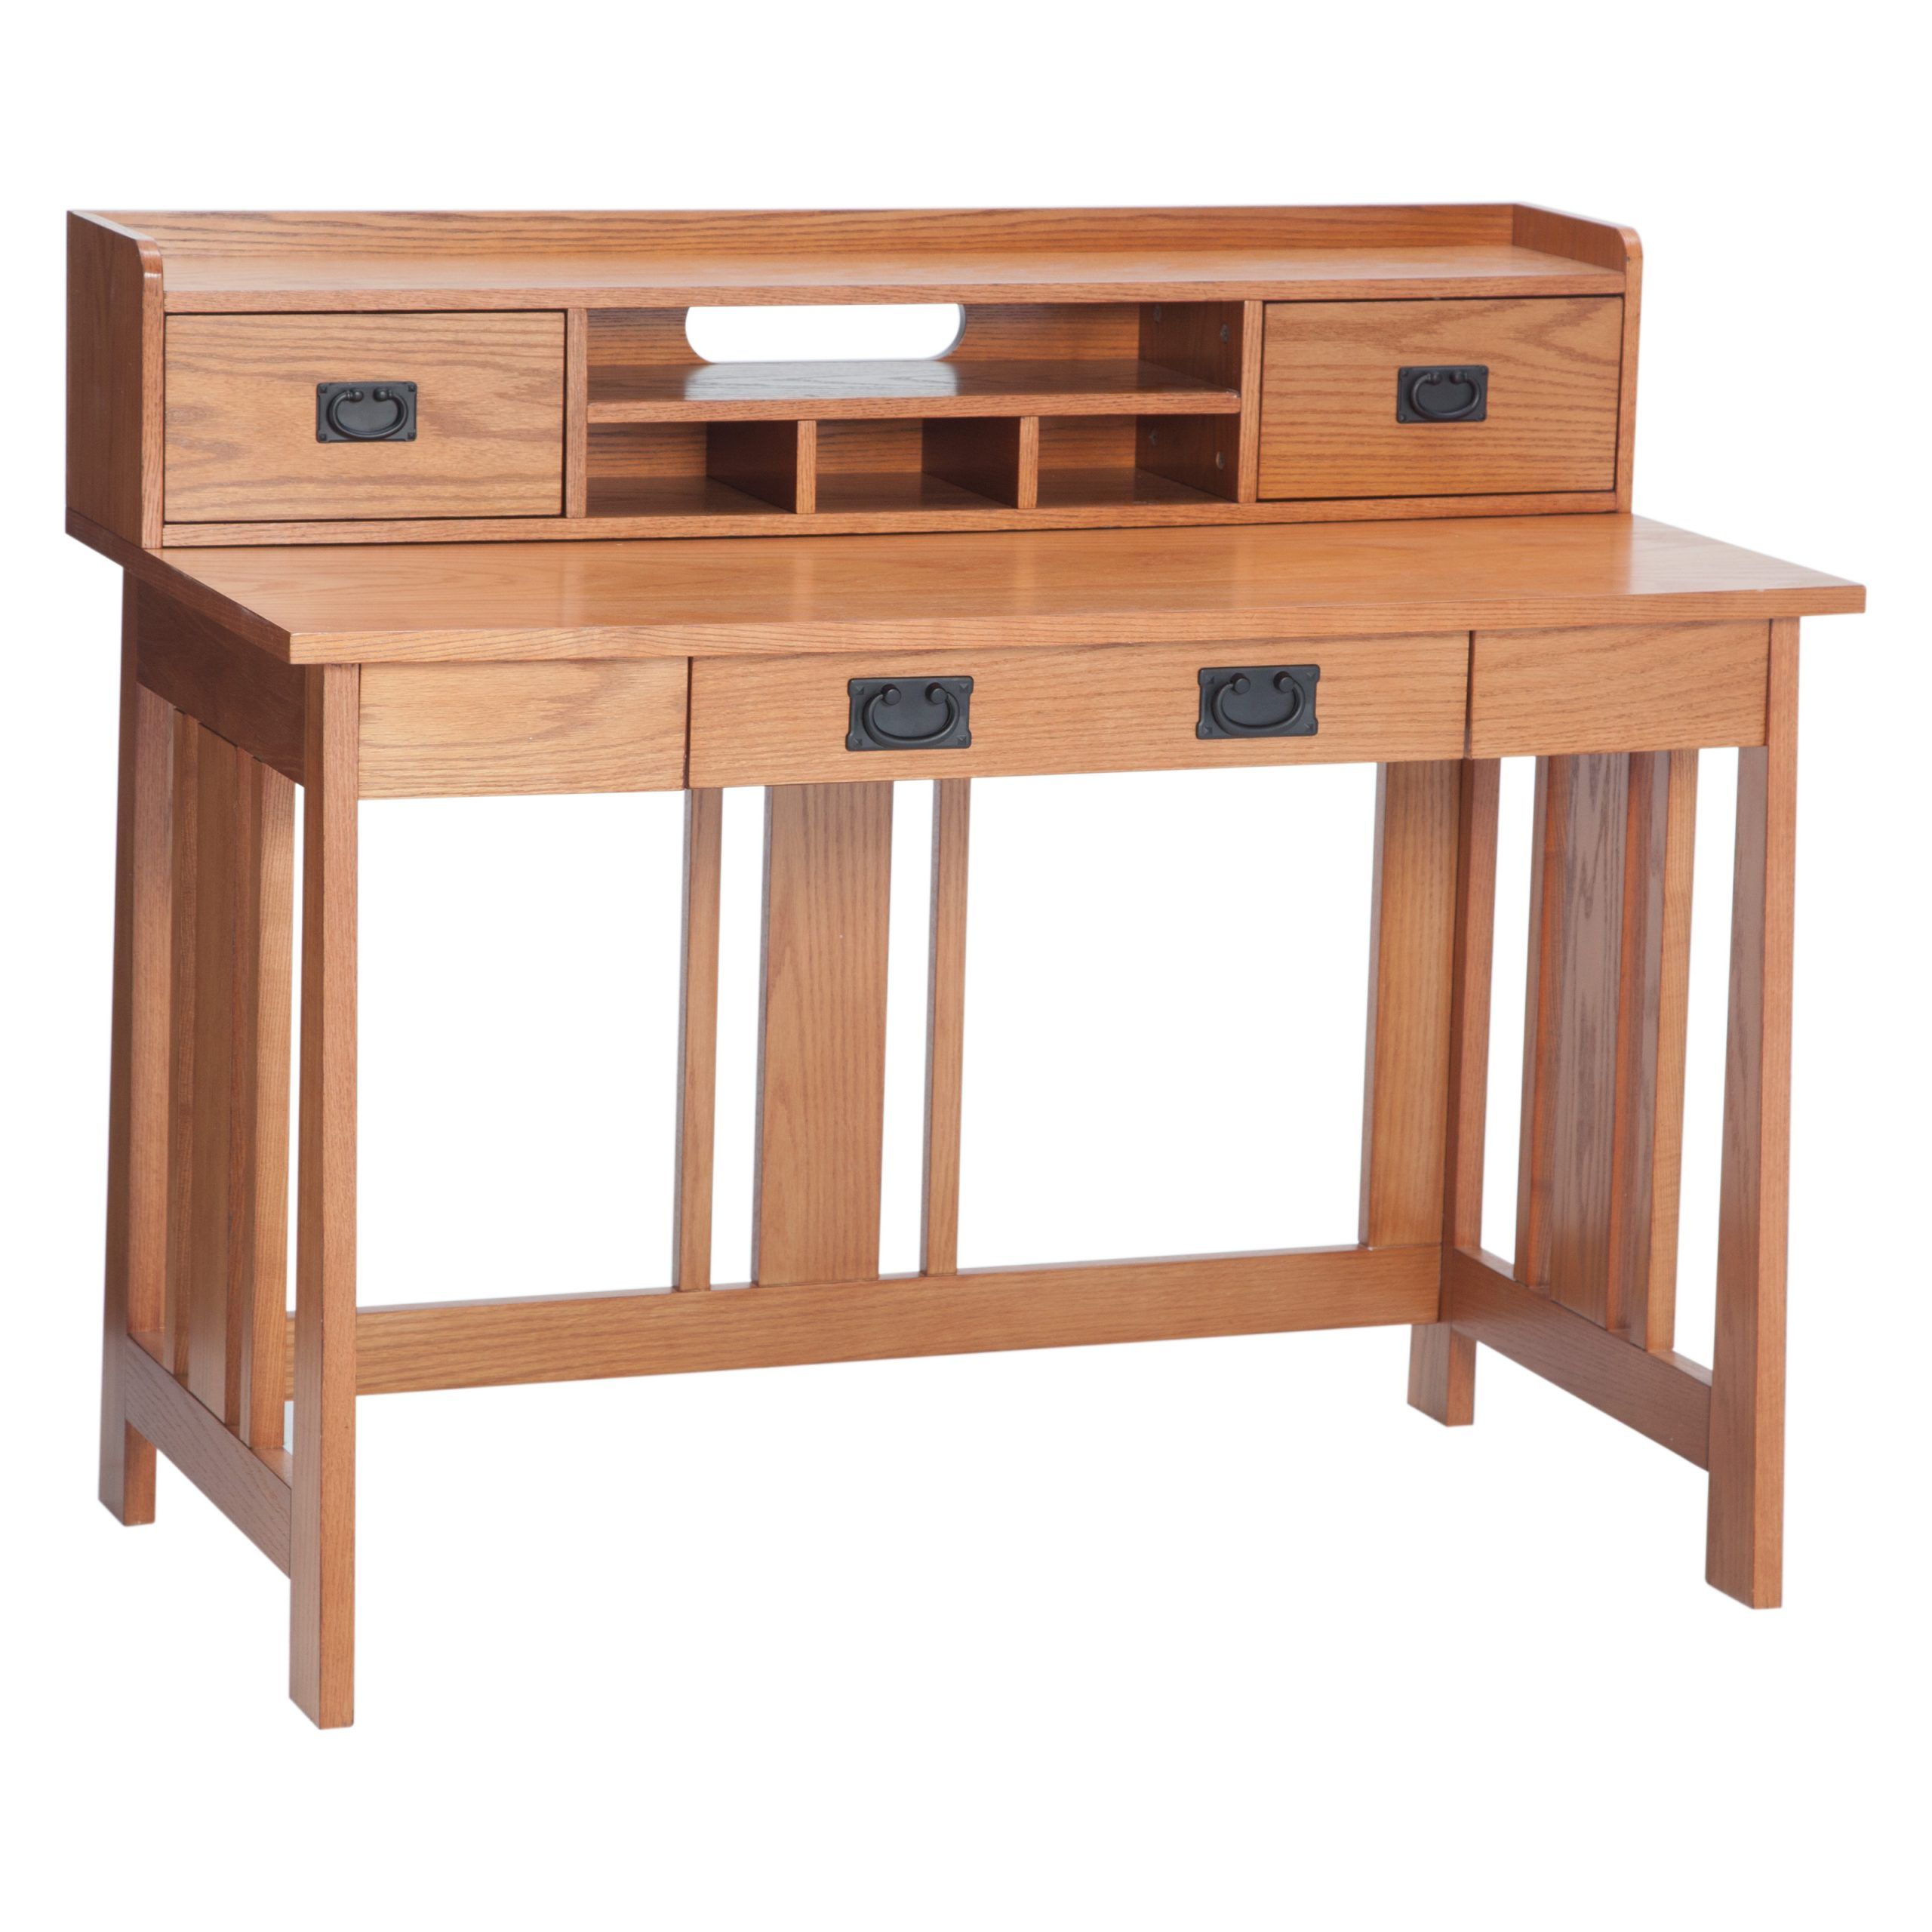 Belham Living Everett Mission Writing Desk With Optional Hutch – Light Within Oak Computer Writing Desks (View 8 of 15)